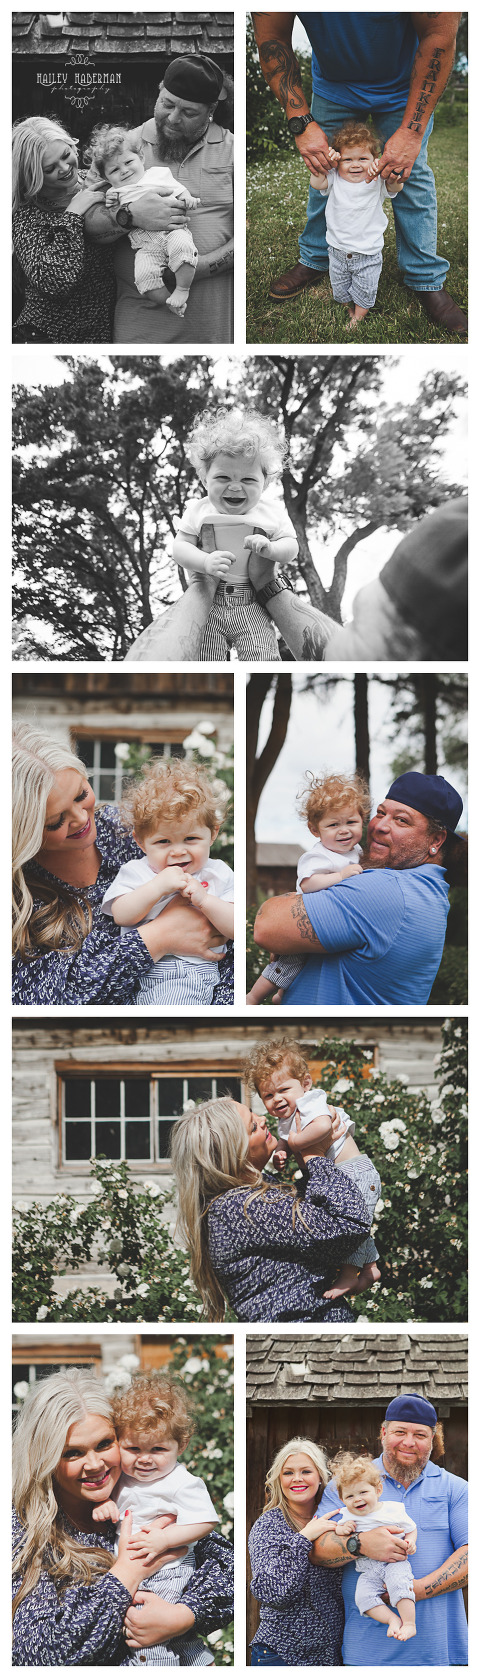 Spring Family Session with Krebs by Hailey Haberman Ellensburg Lifestyle Photographer